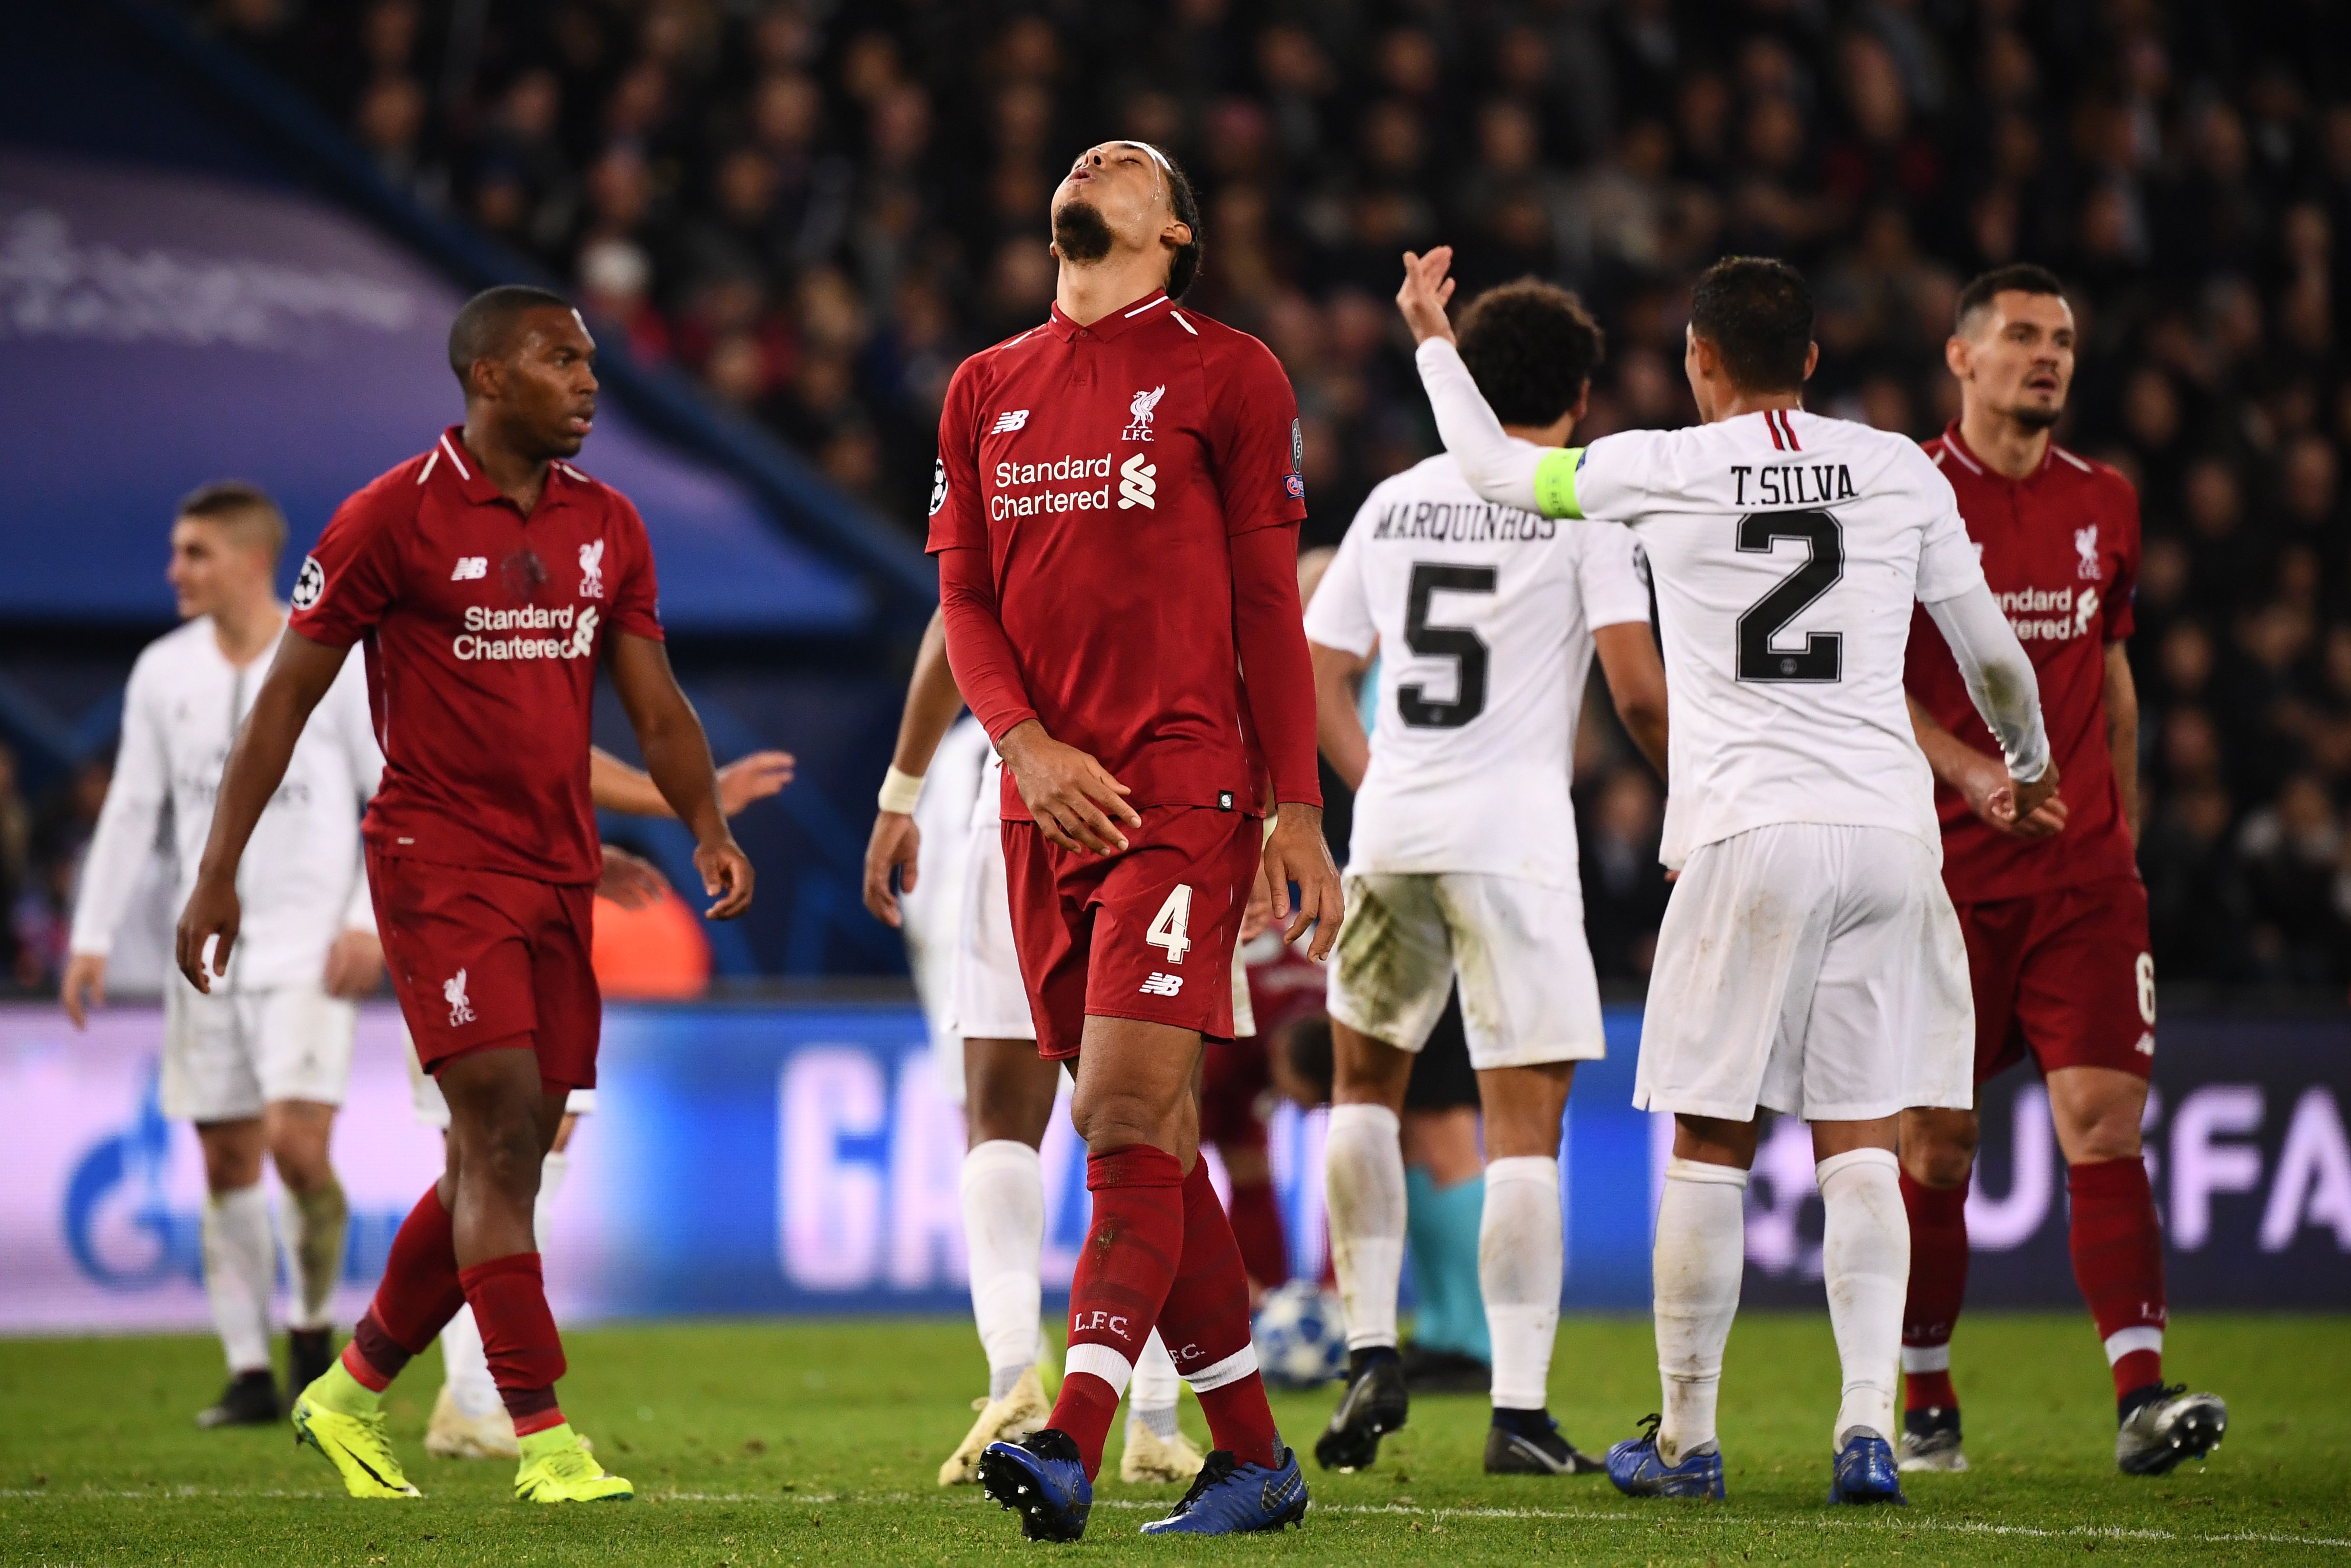 Liverpool's Dutch defender Virgil van Dijk and teammates react during the UEFA Champions League Group C football match between Paris Saint-Germain (PSG) and Liverpool FC at the Parc des Princes stadium, in Paris, on November 28, 2018. (Photo by FRANCK FIFE / AFP)        (Photo credit should read FRANCK FIFE/AFP/Getty Images)